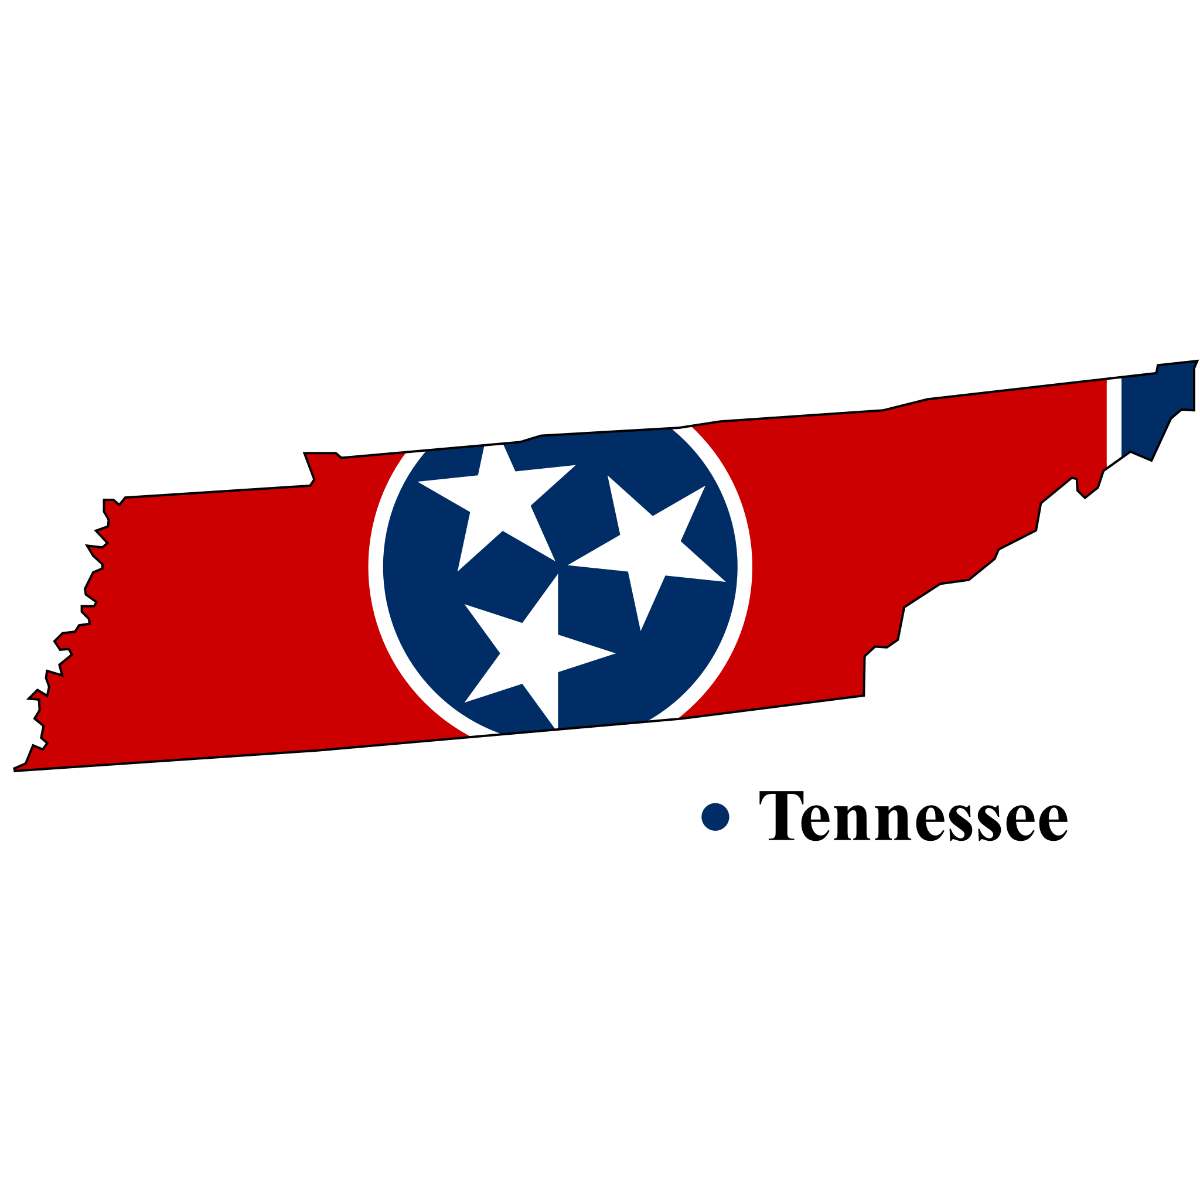 Tennessee State map cutout with Tennessee flag superimposed